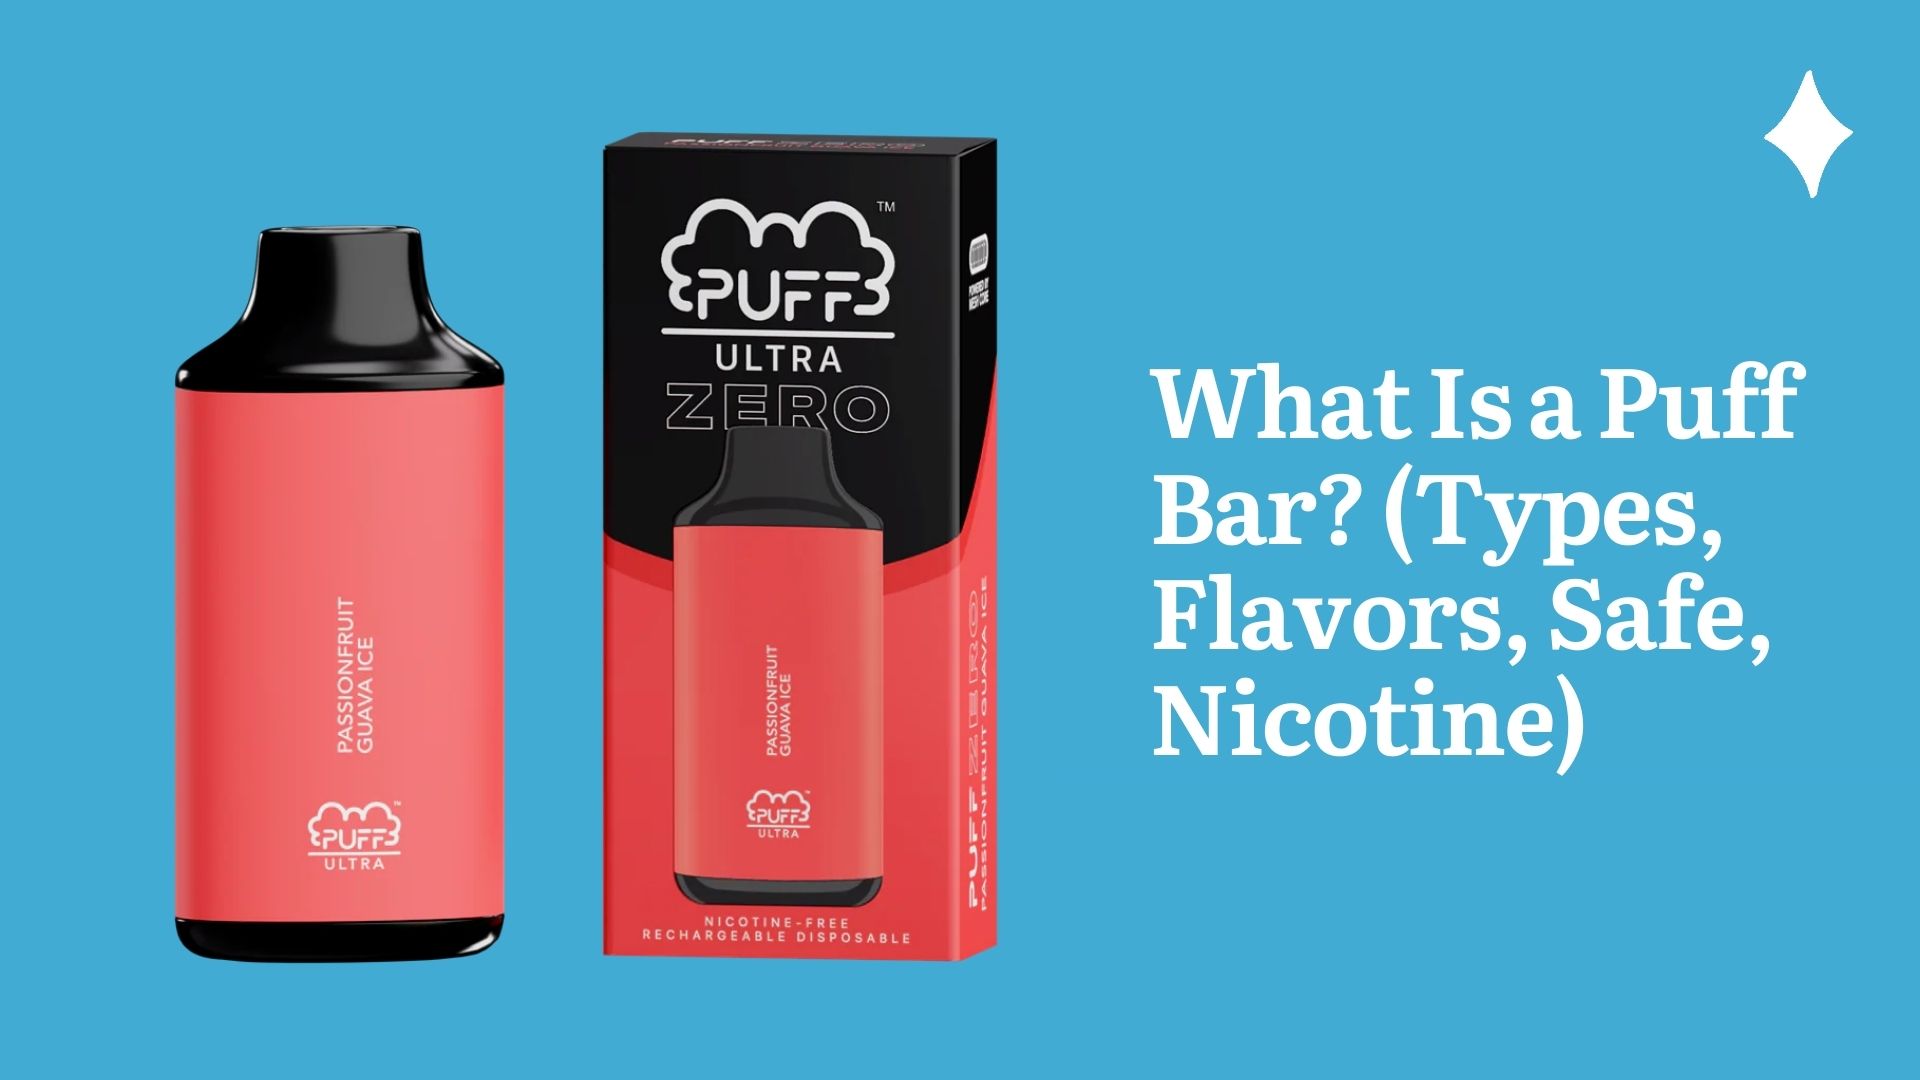 What Is a Puff Bar